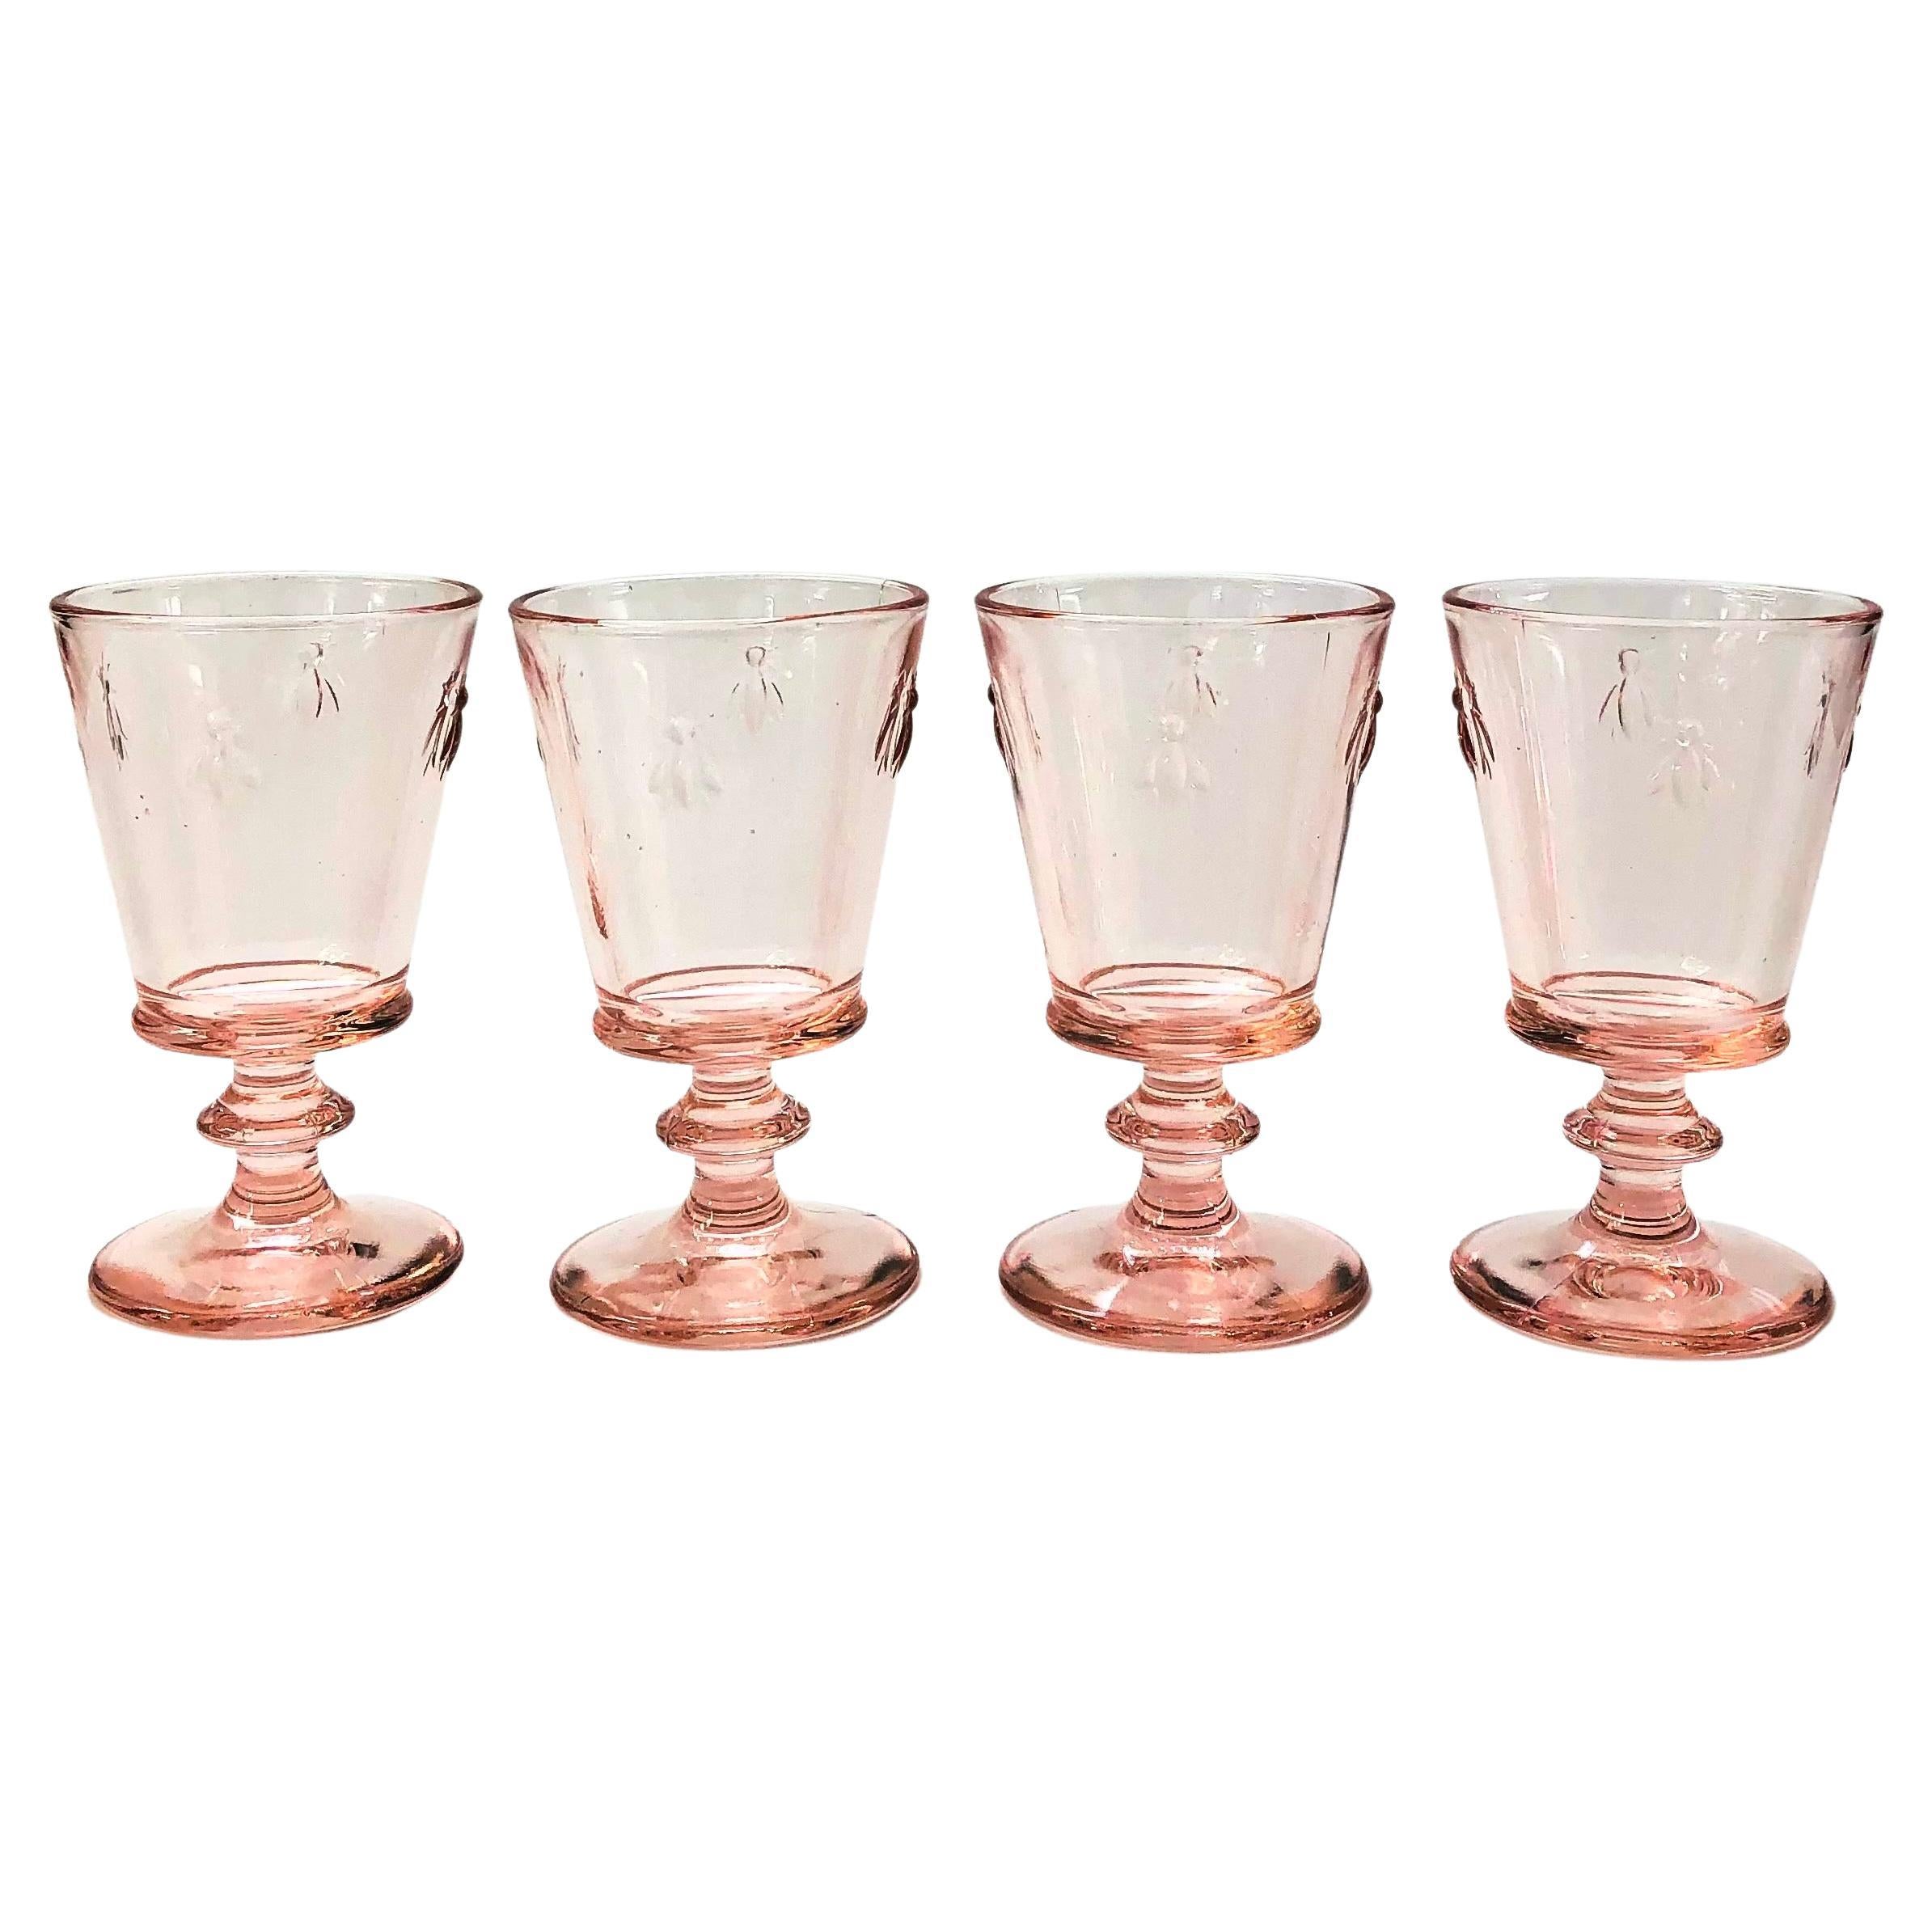 French Bee Wine Glass, Set of 4 - The Vermont Country Store